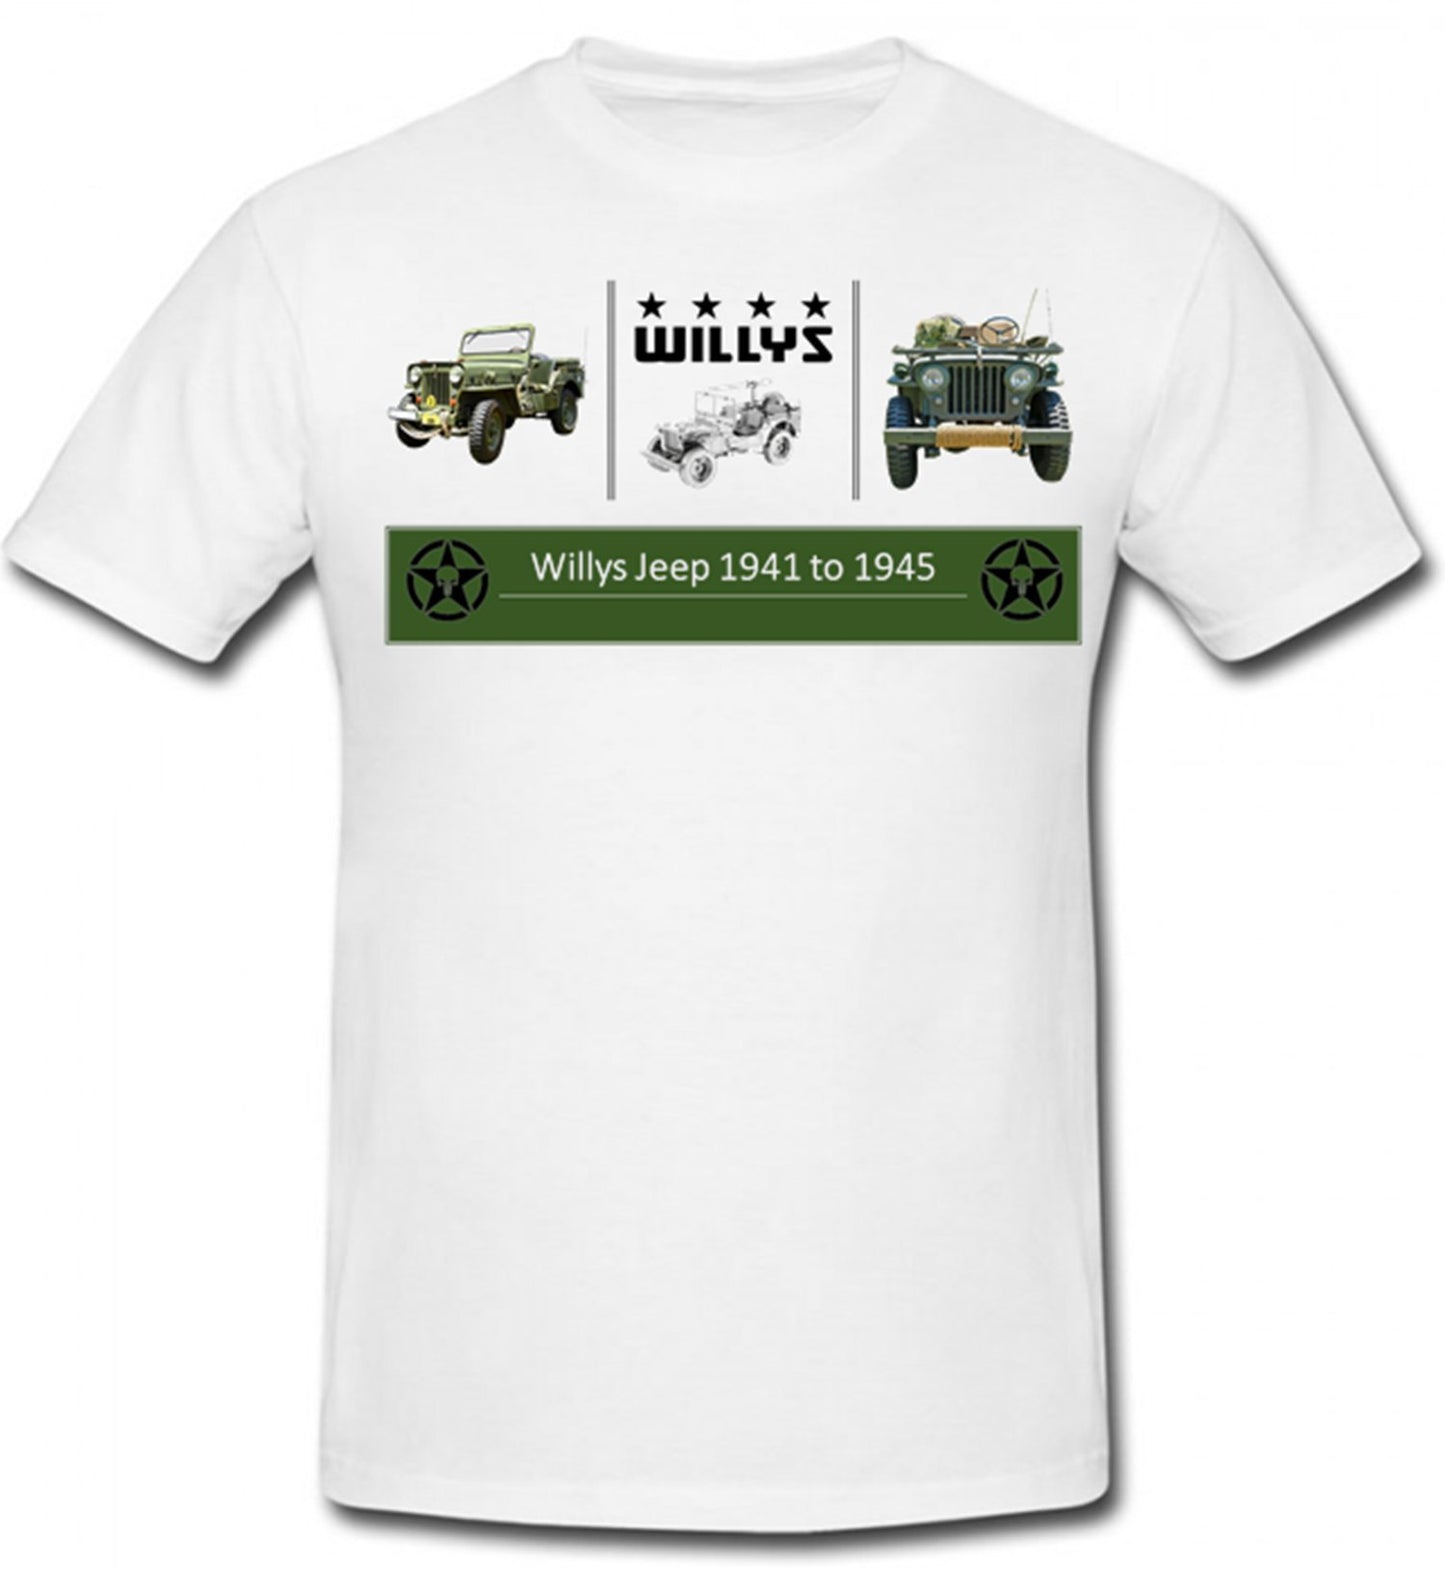 Willys Jeep 1941 to 1945